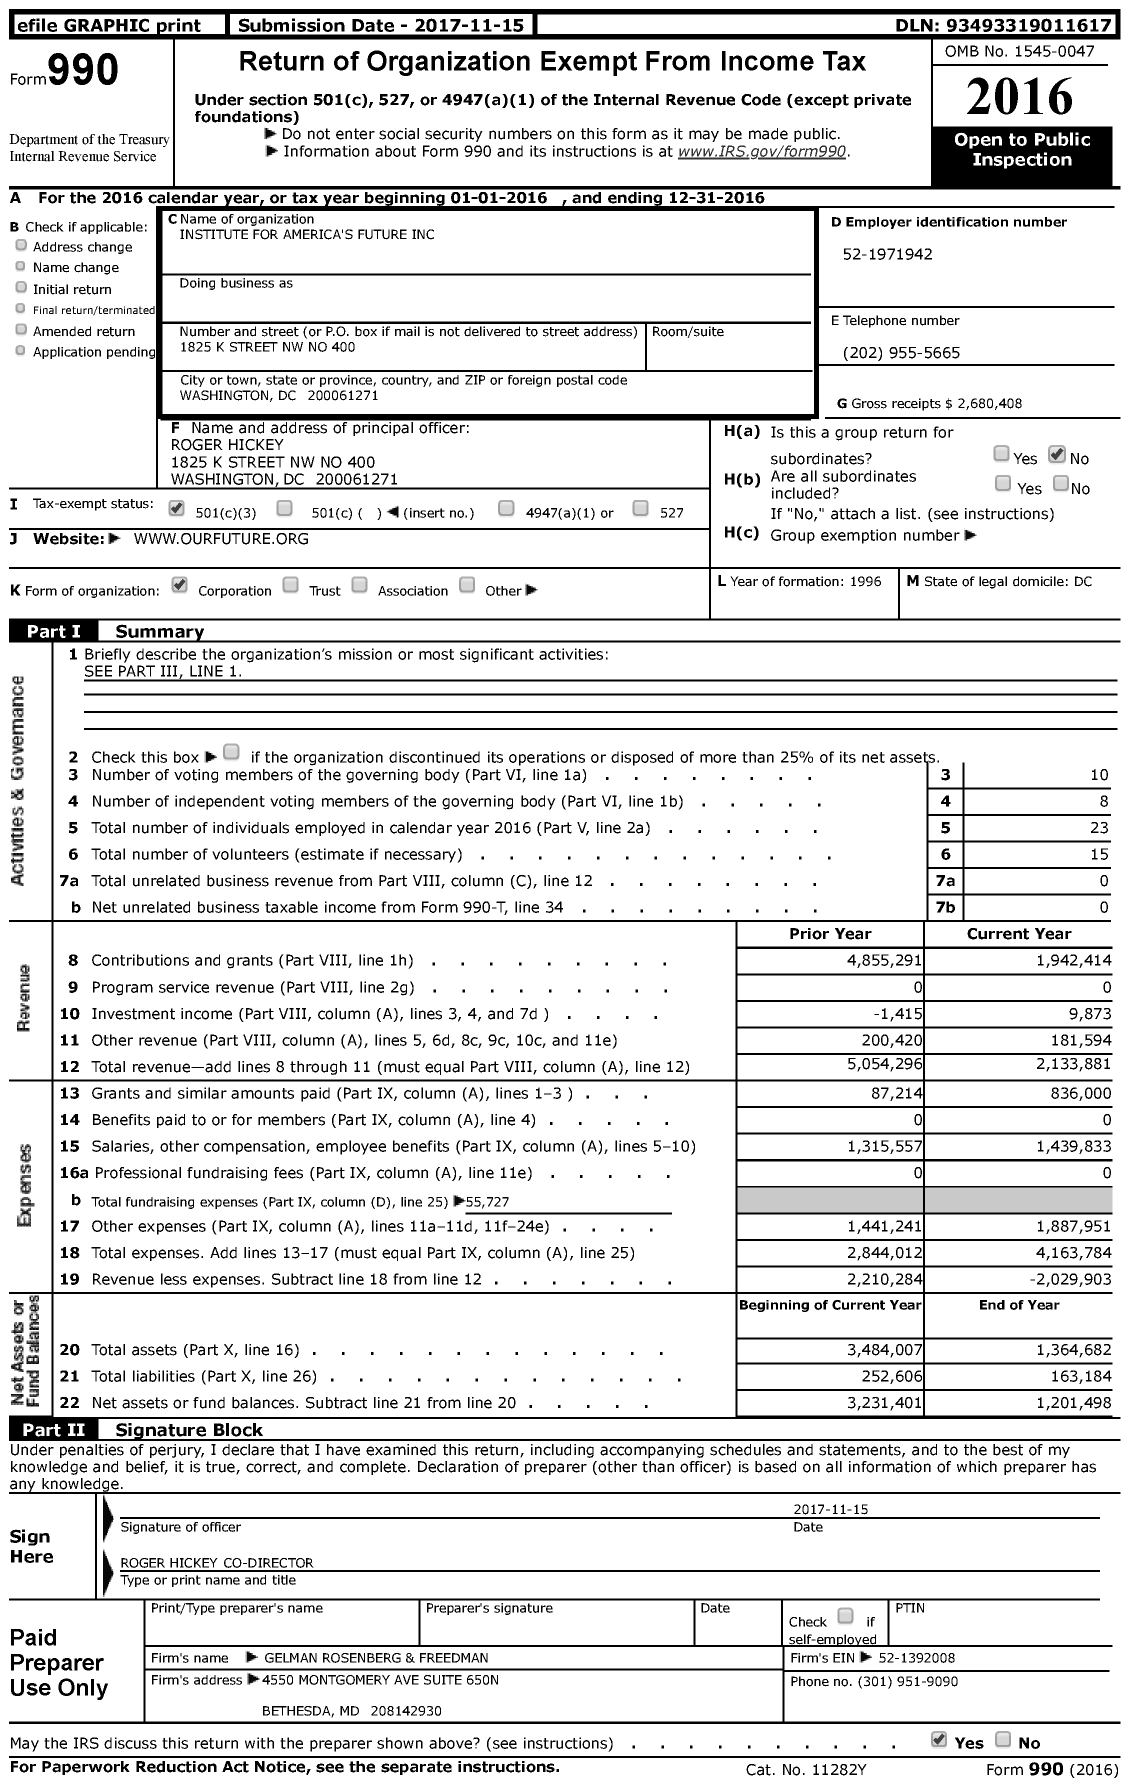 Image of first page of 2016 Form 990 for Institute for America's Future